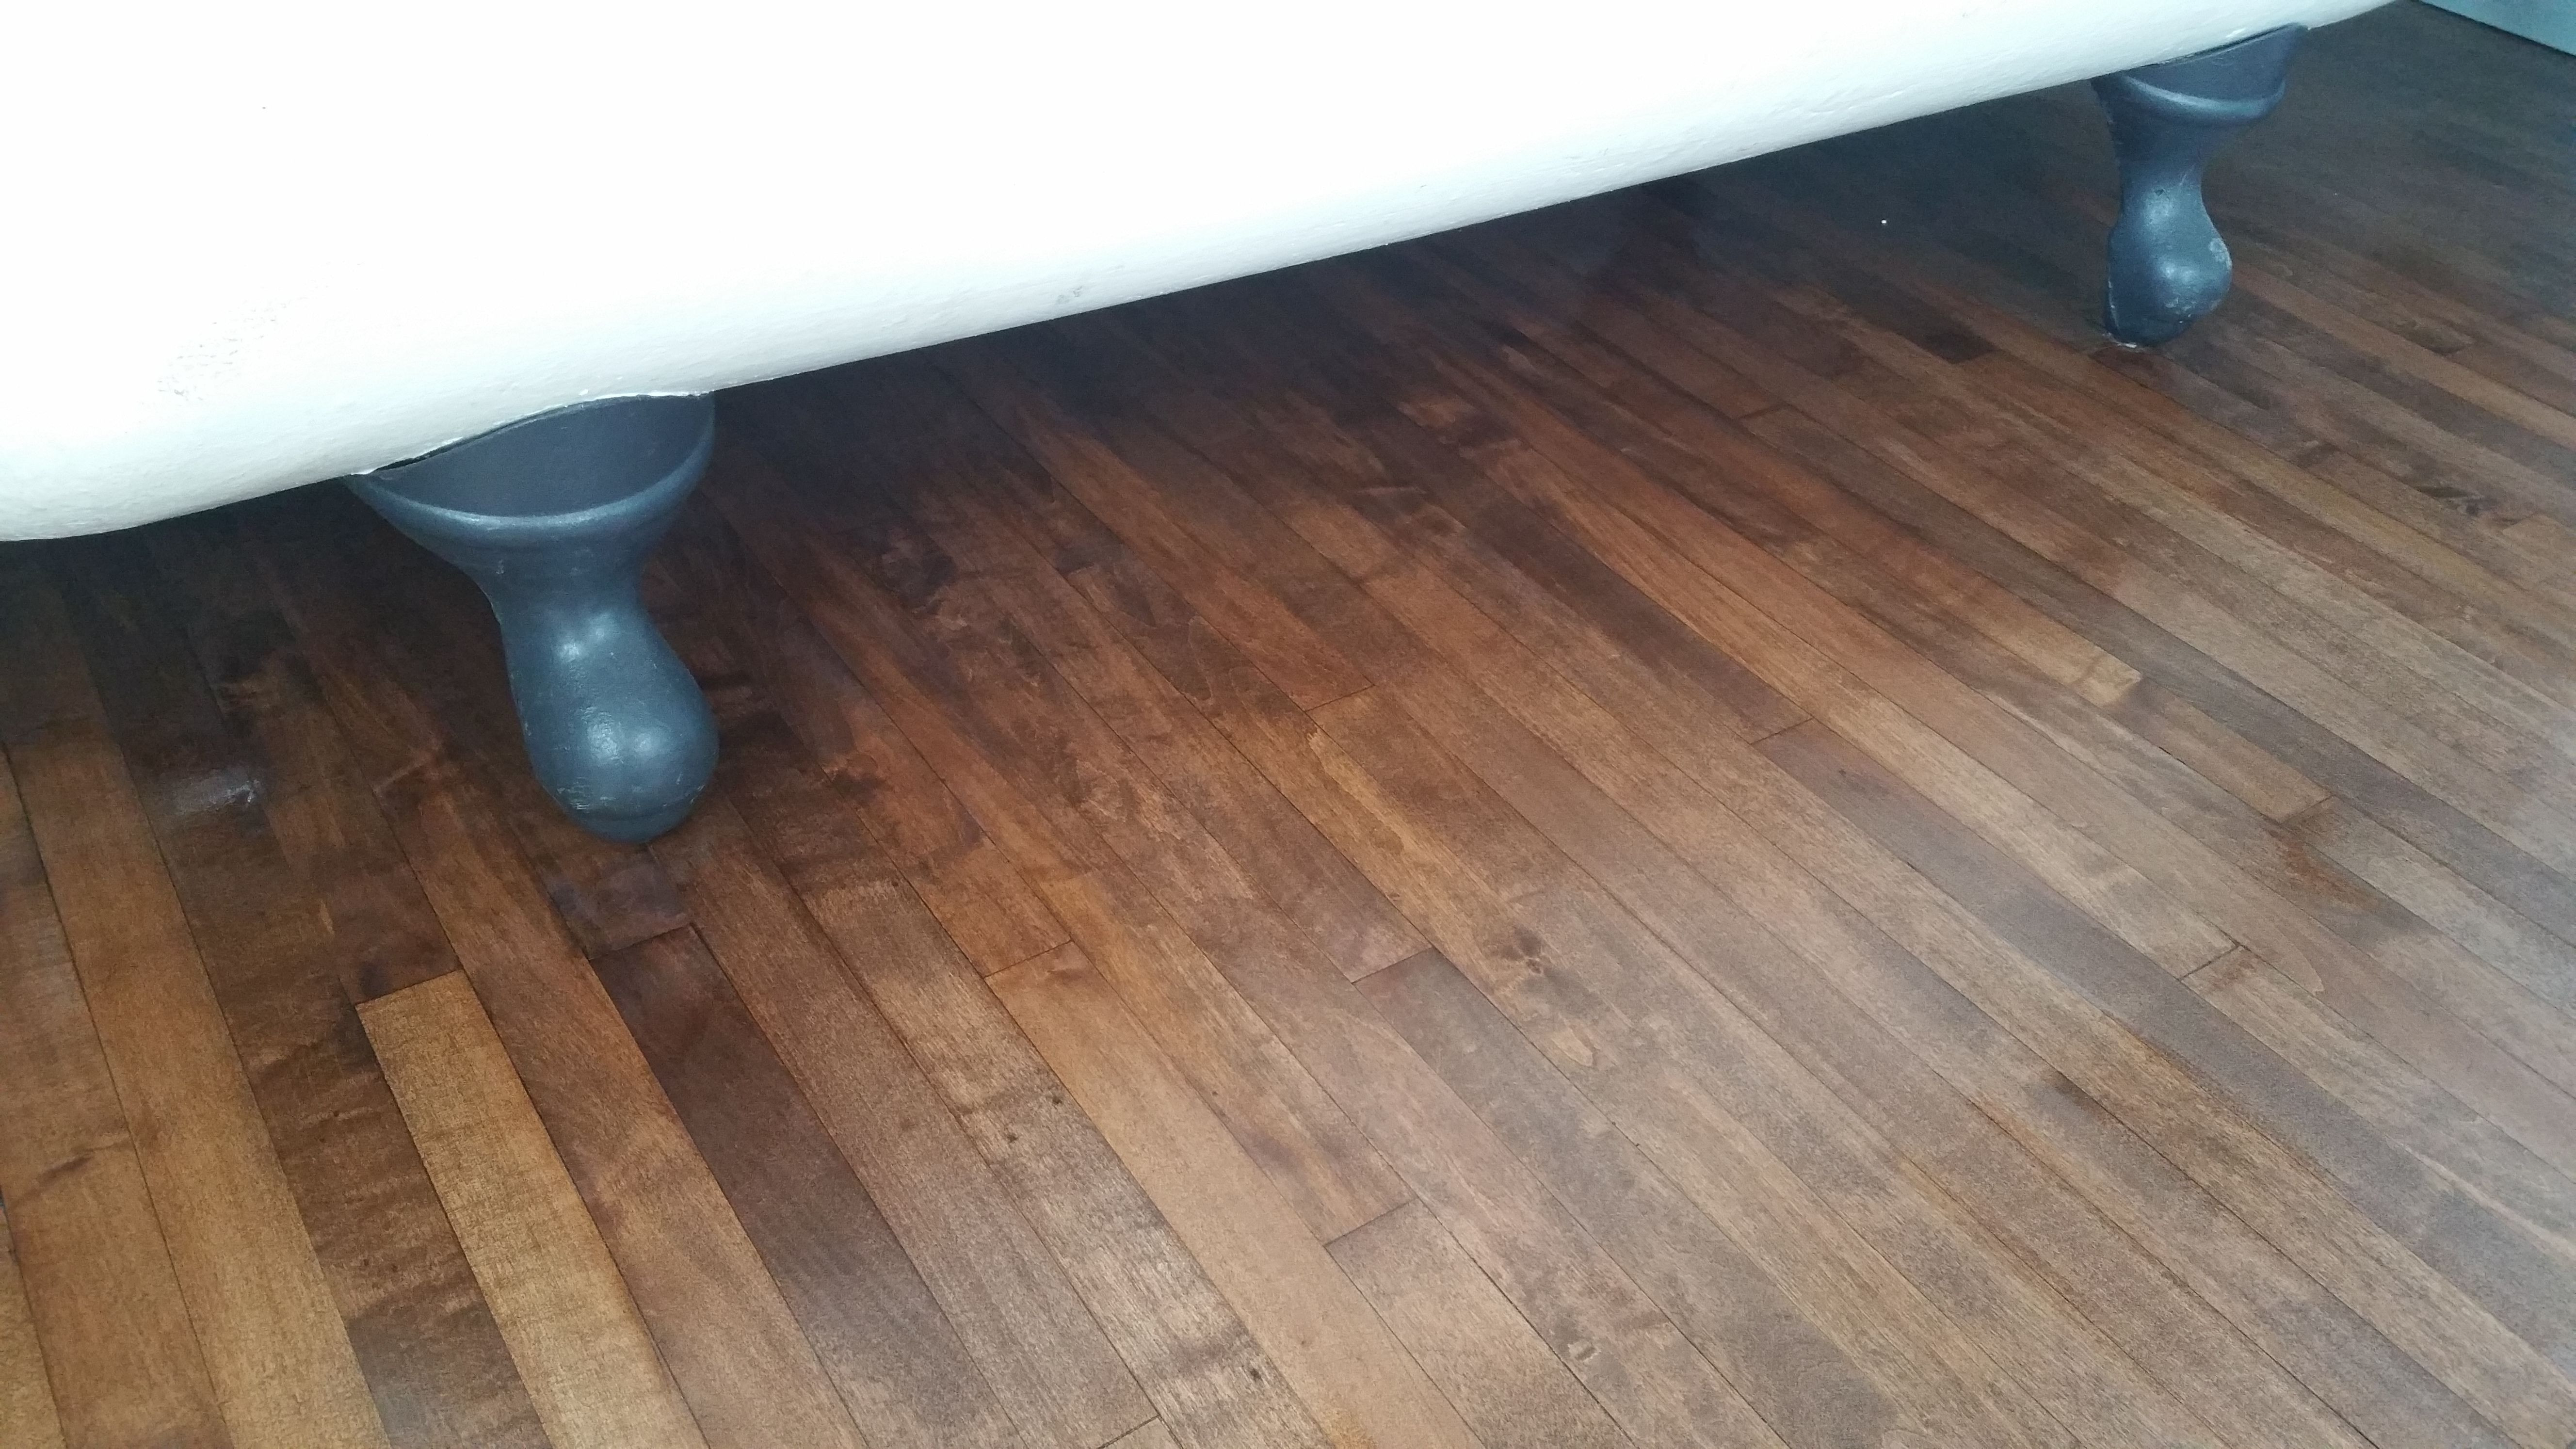 hardwood flooring prices calgary of 1 1 2 maple in a 100 year old calgary home was in horrible shape within 1 1 2 maple in a 100 year old calgary home was in horrible shape but sanded up and stained beautifully